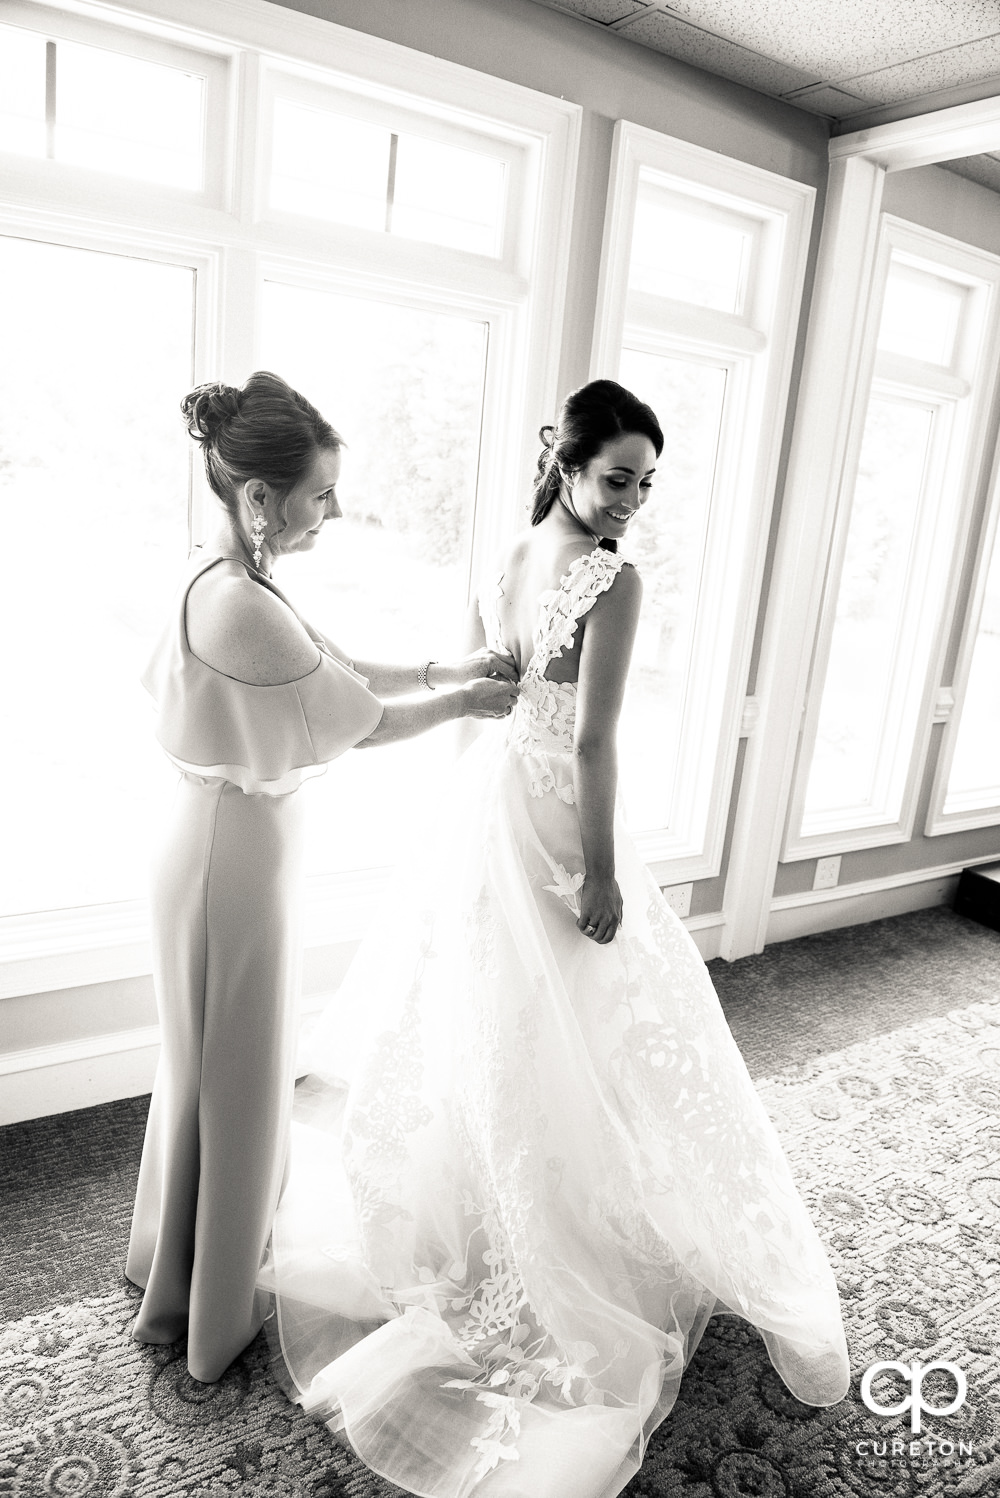 Bride's mom helping her into her wedding dress.